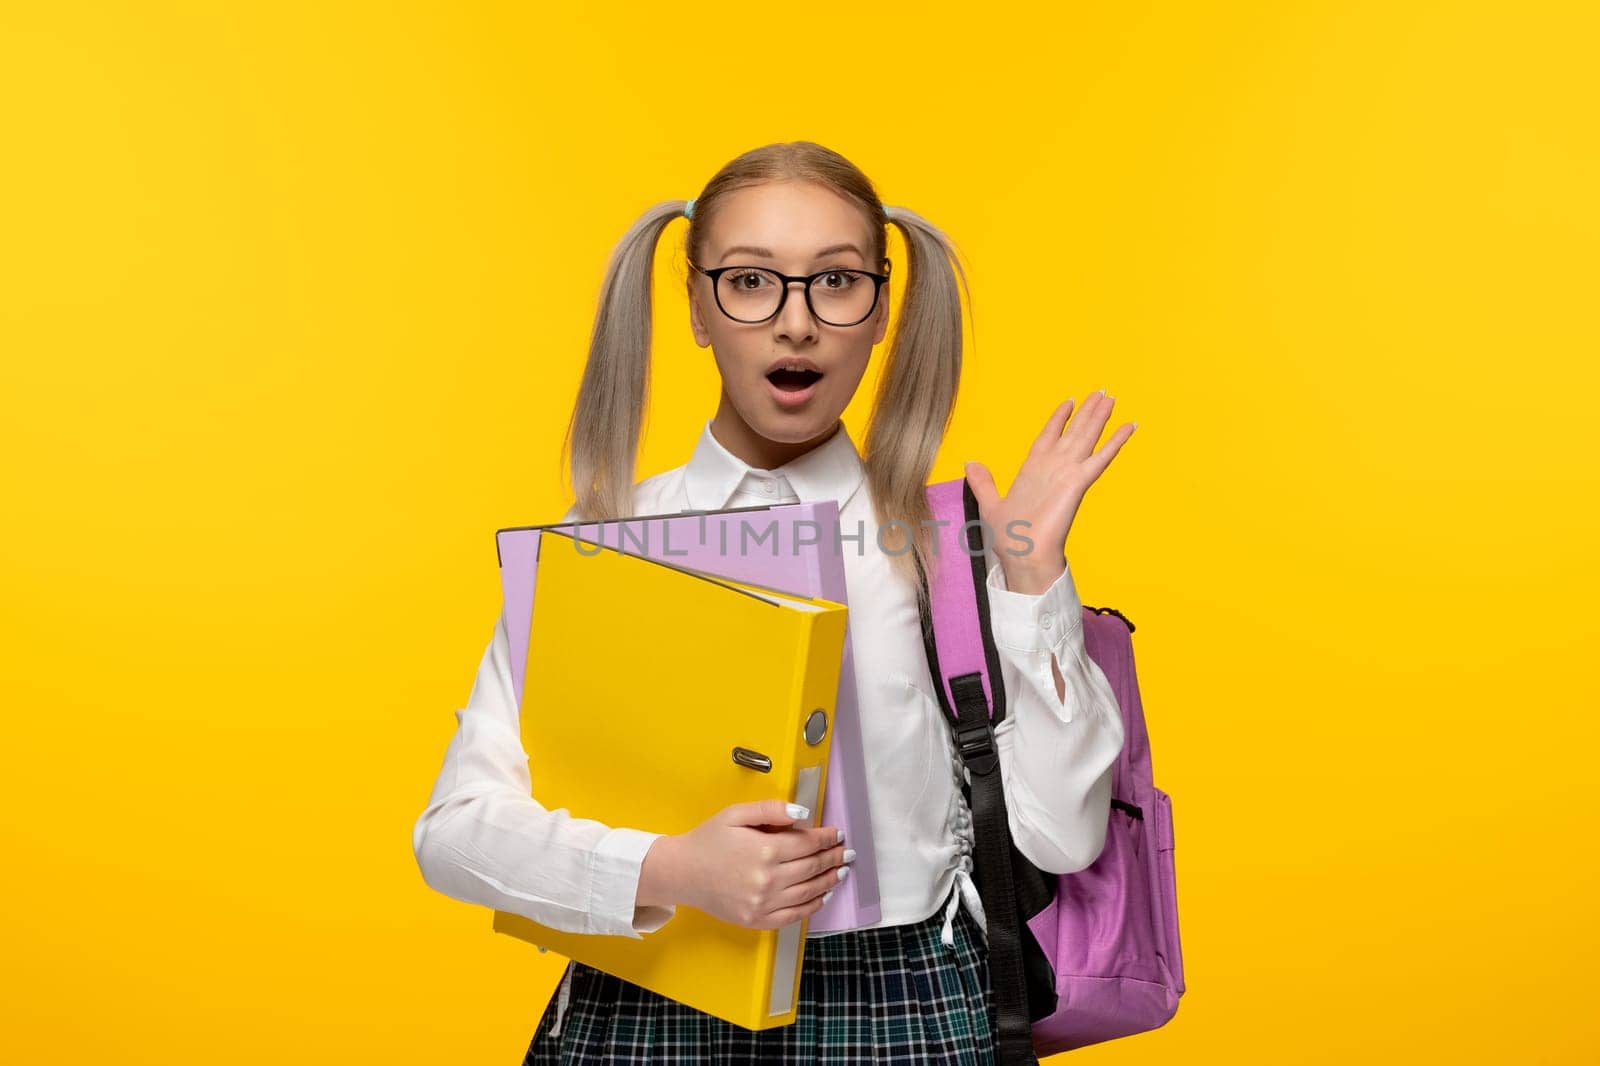 world book day excited blonde schoolgirl with waving hands wearing glasses